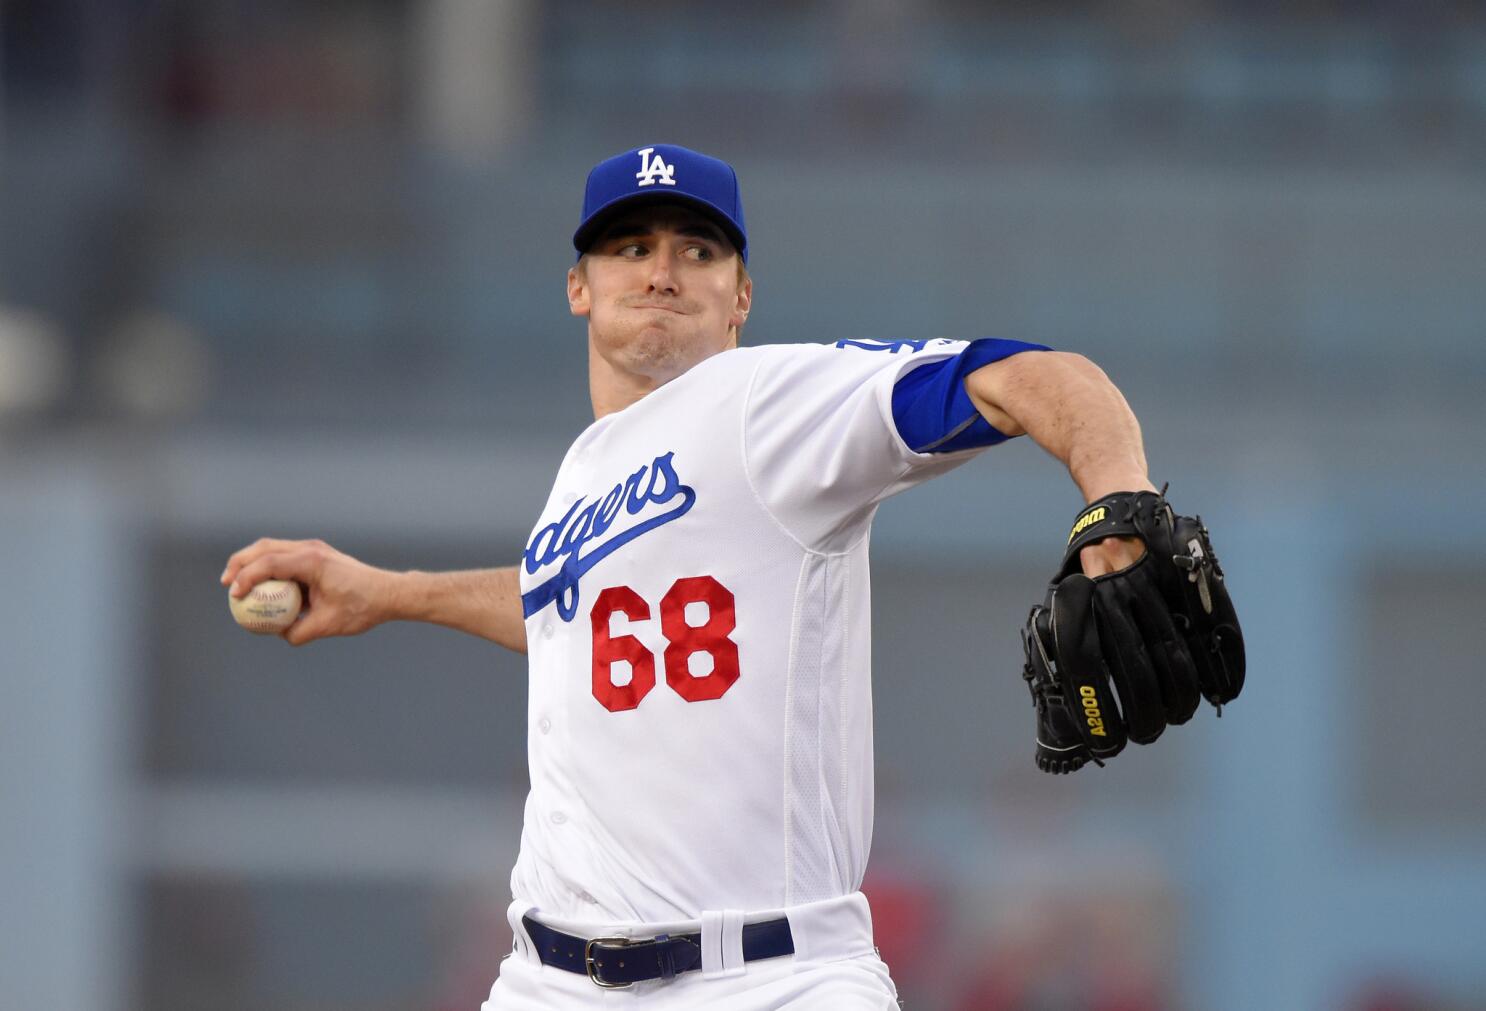 Ross Stripling was interested in returning to the Blue Jays